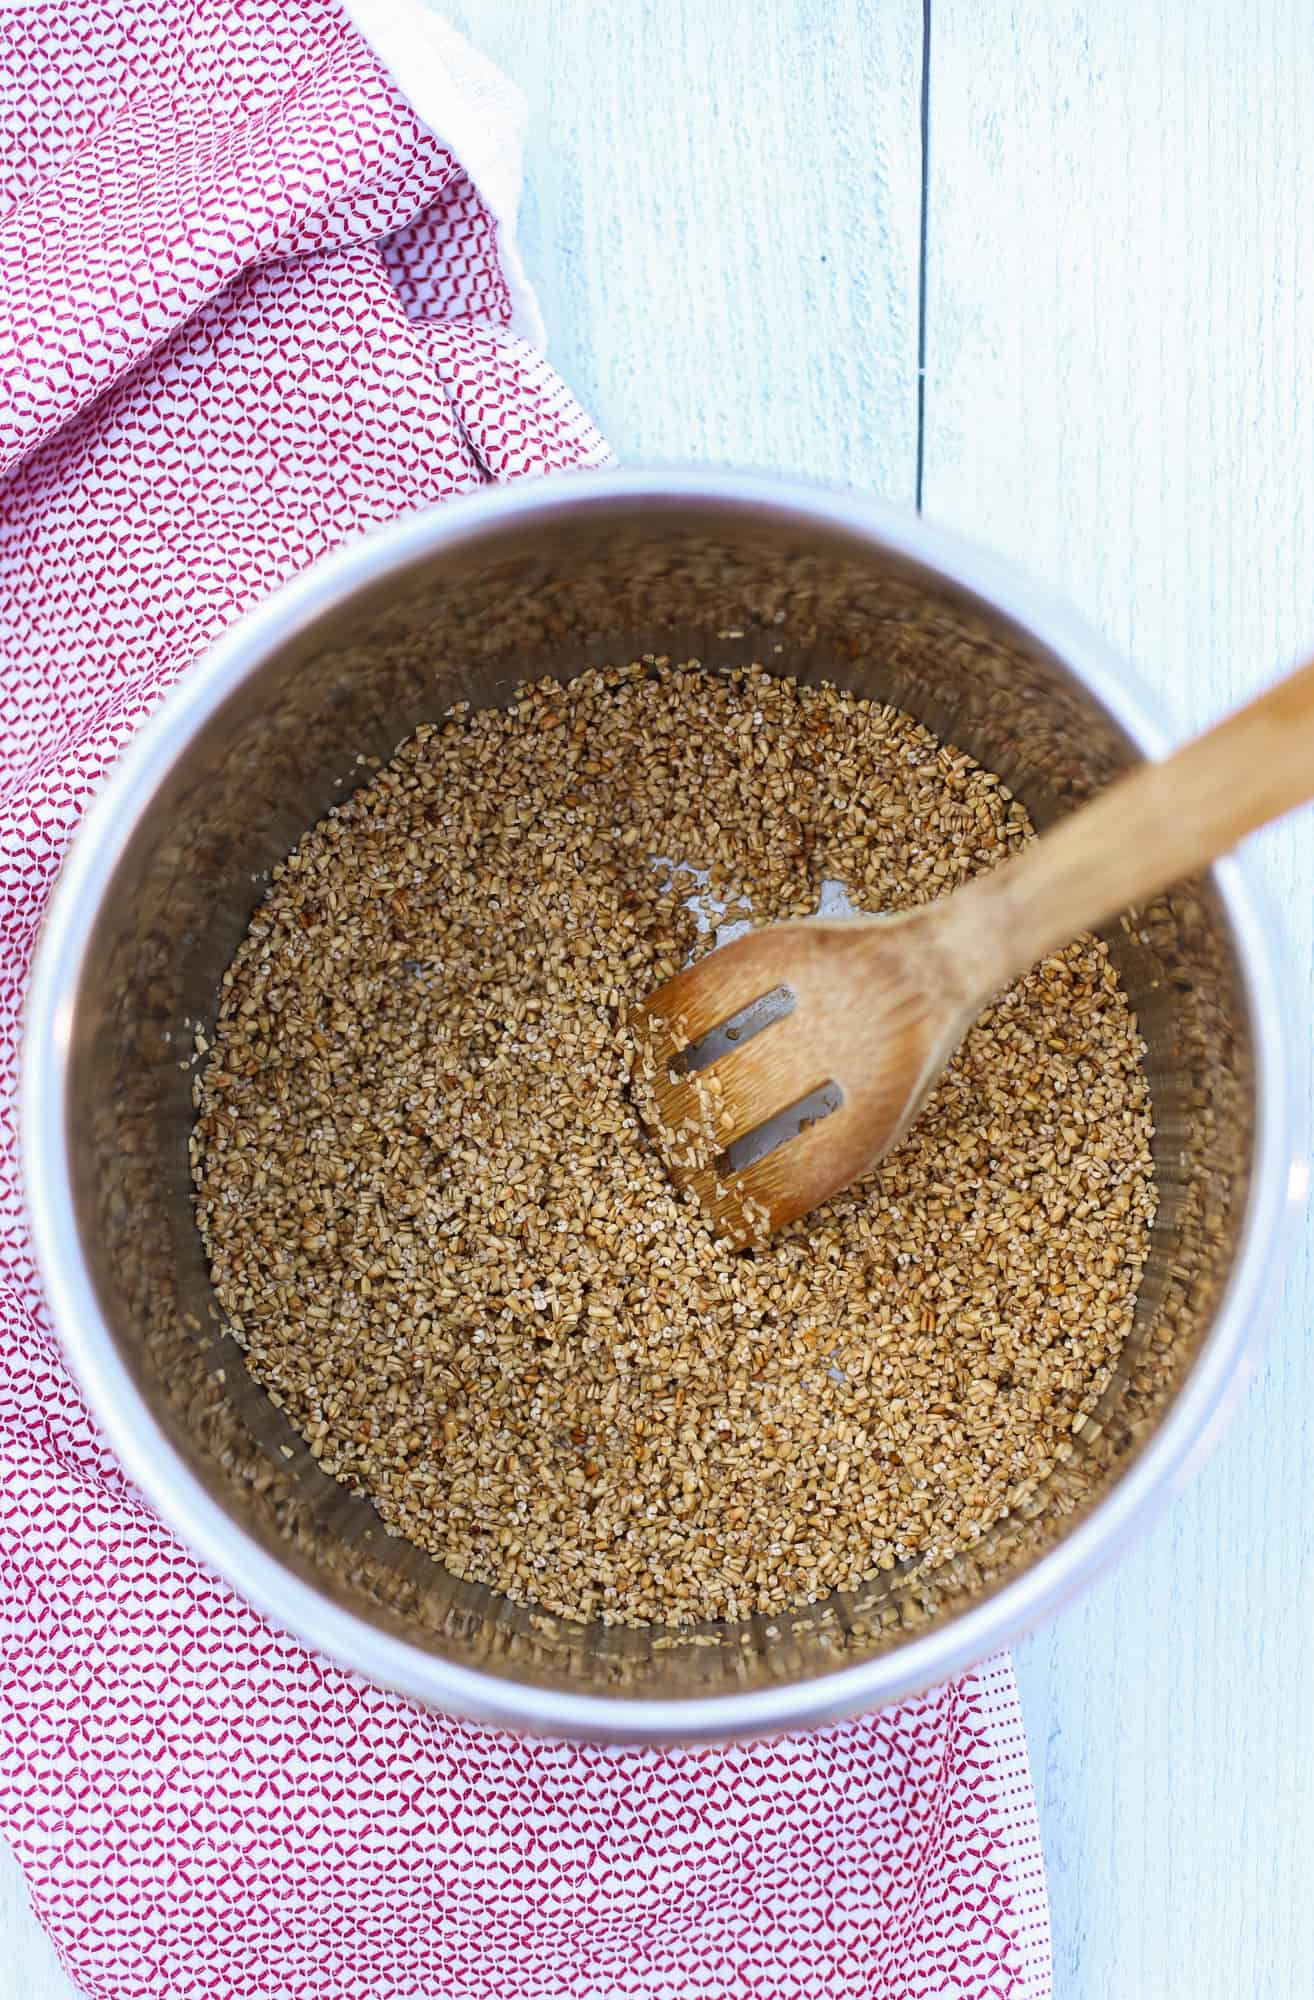 Toasted steel cut oats in an instant pot.